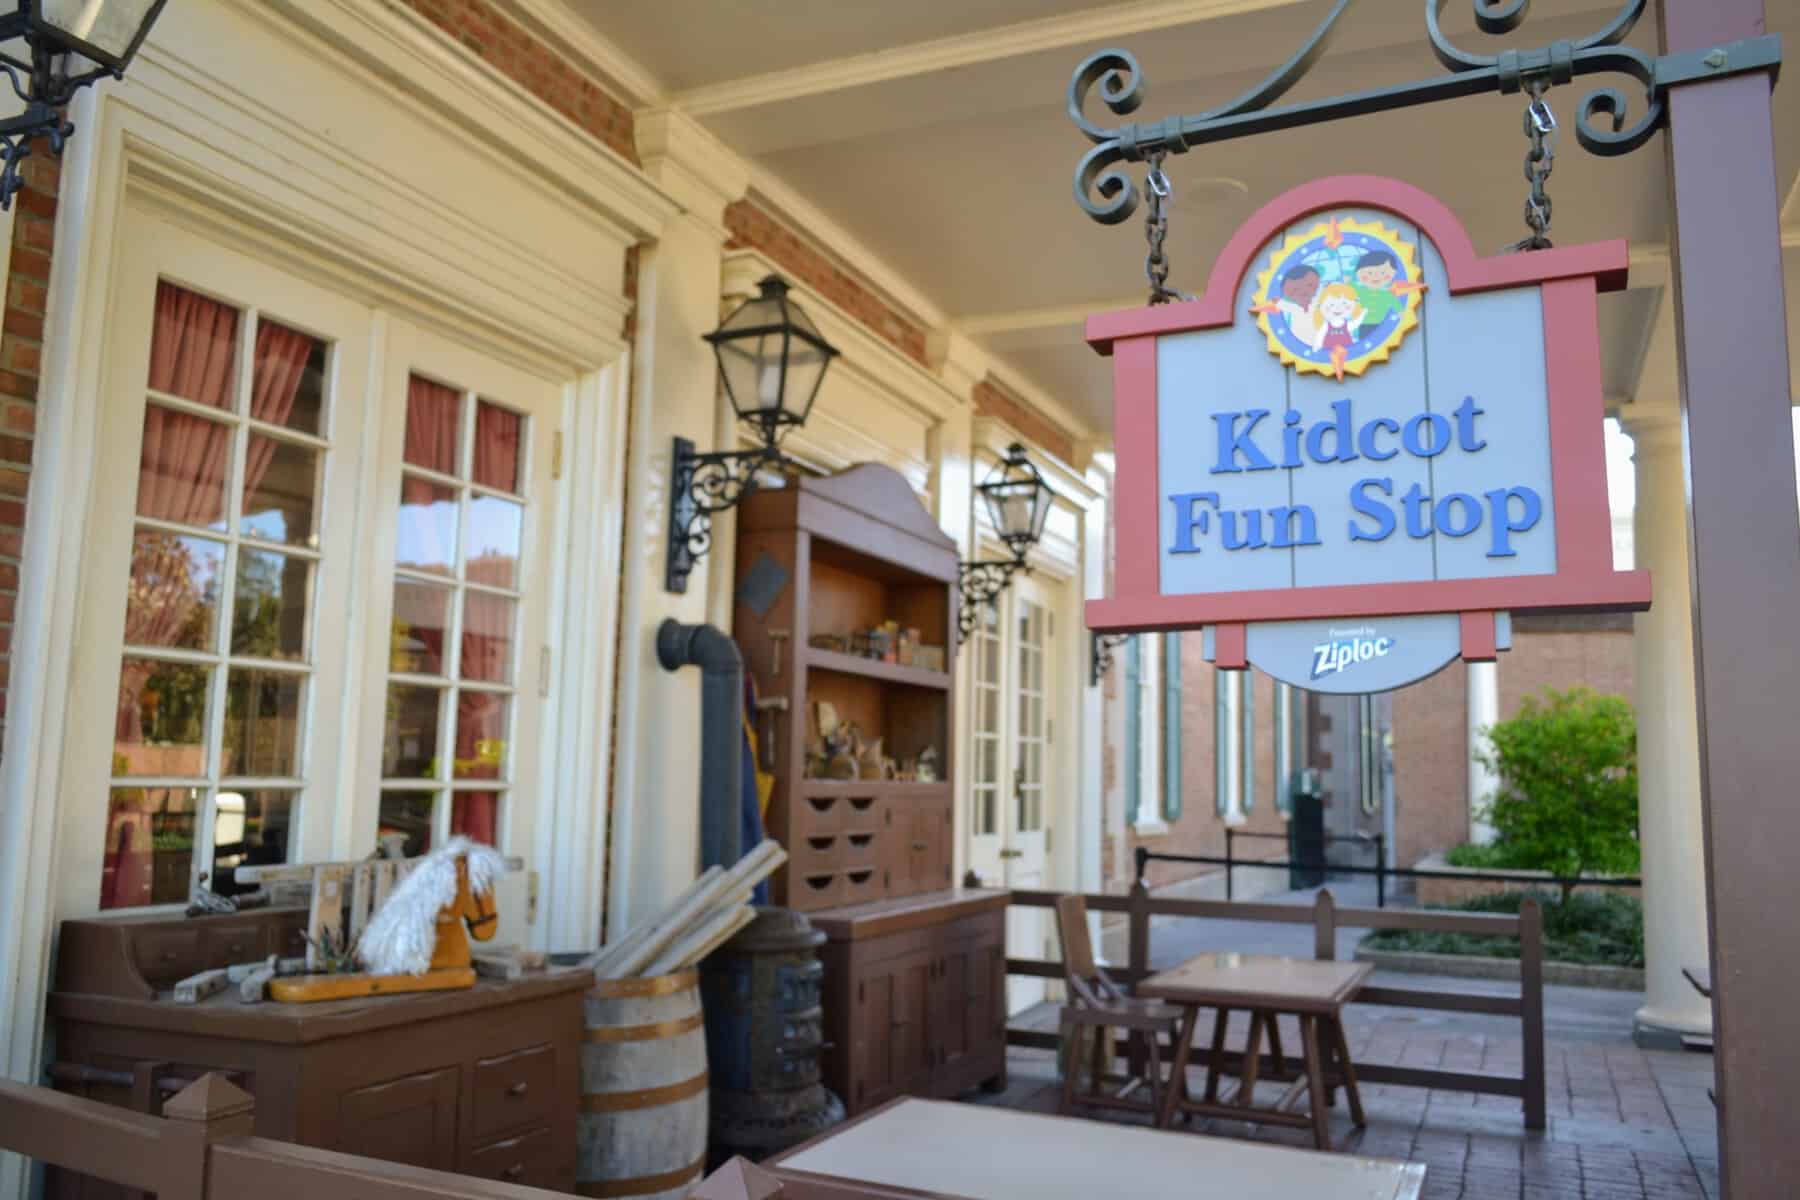 Free/cheap things to do with kids at Disney World